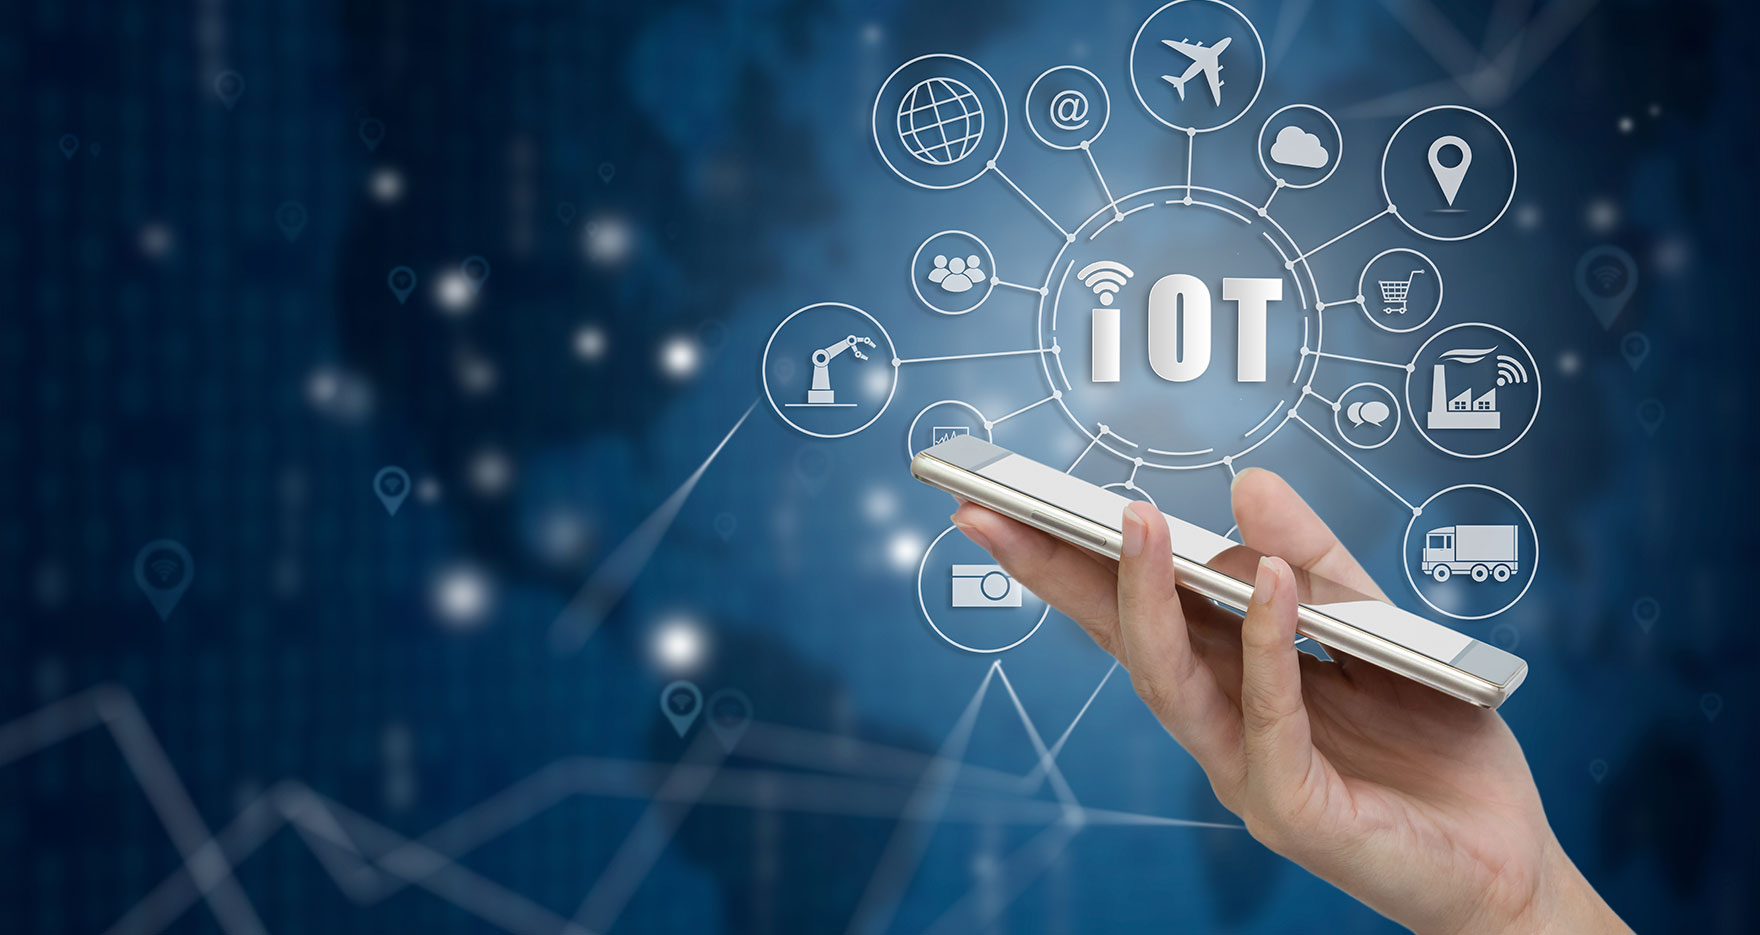 From IIoT to AIoT: What is the Smart Industrial Internet of Things?